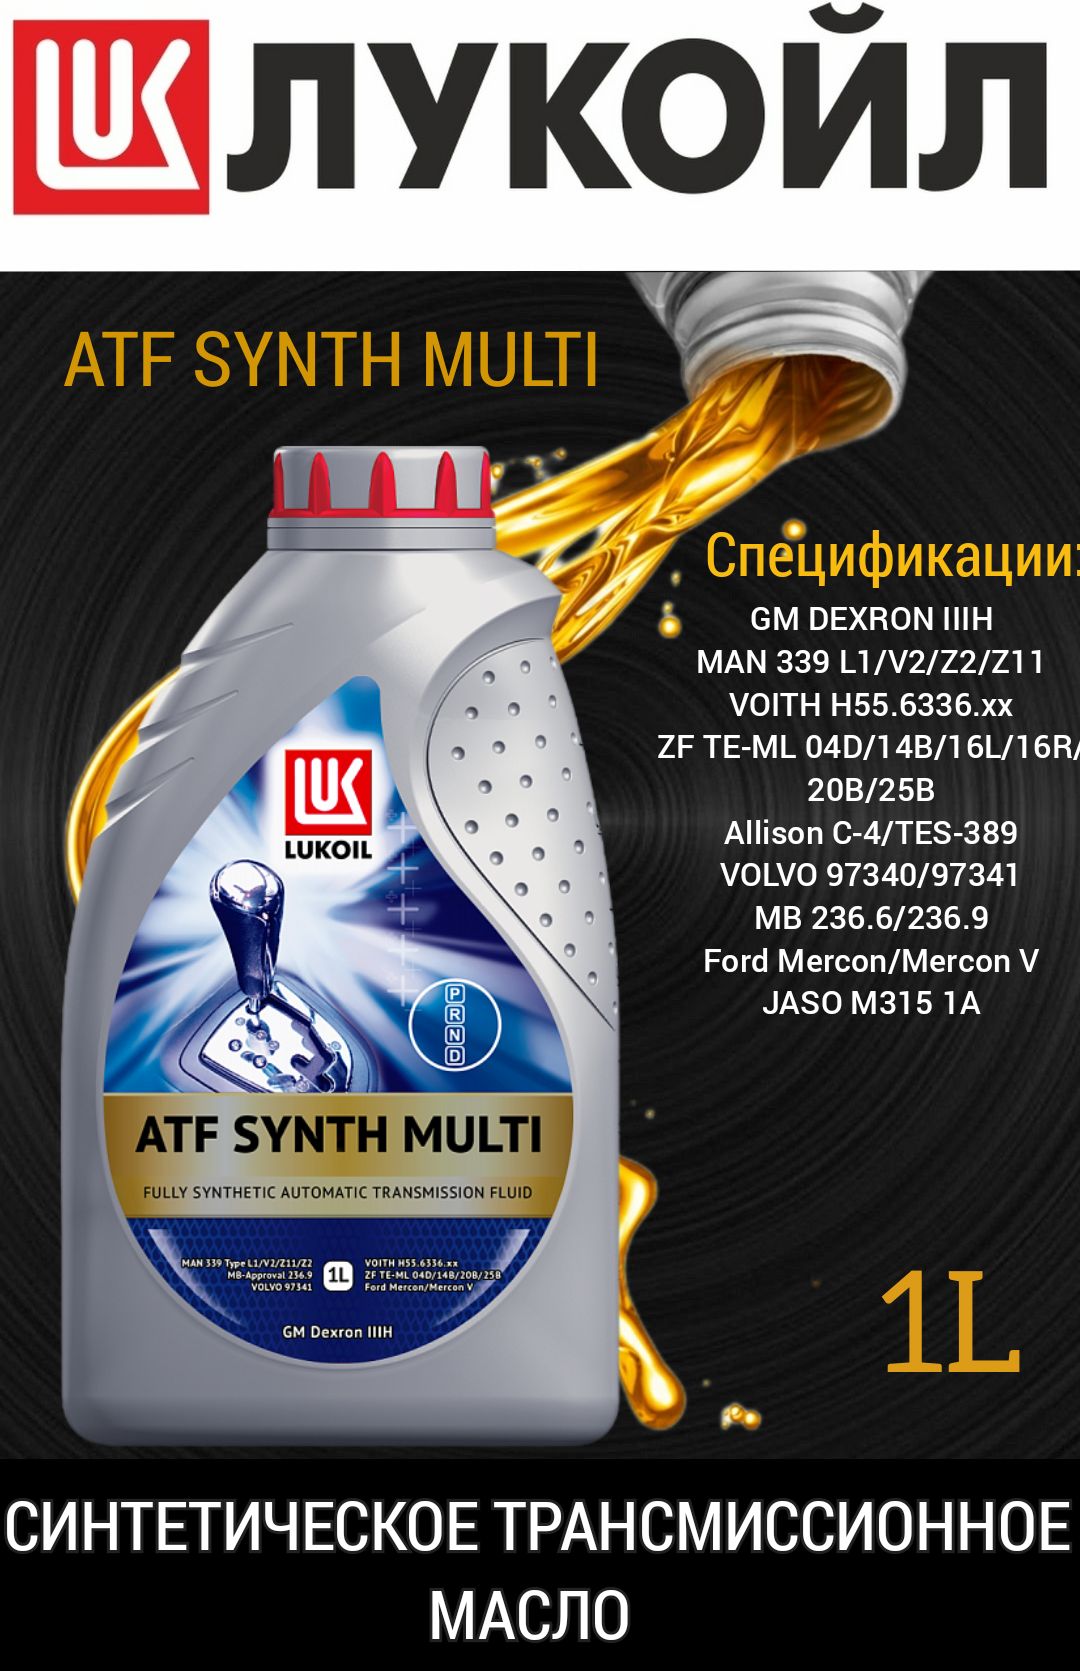 Atf synth multi. Лукойл ATF Synth Multi. Лукойл ATF IIIH. Лукойл ATF Synth v. Лукойл АТФ Мульти для АКПП.